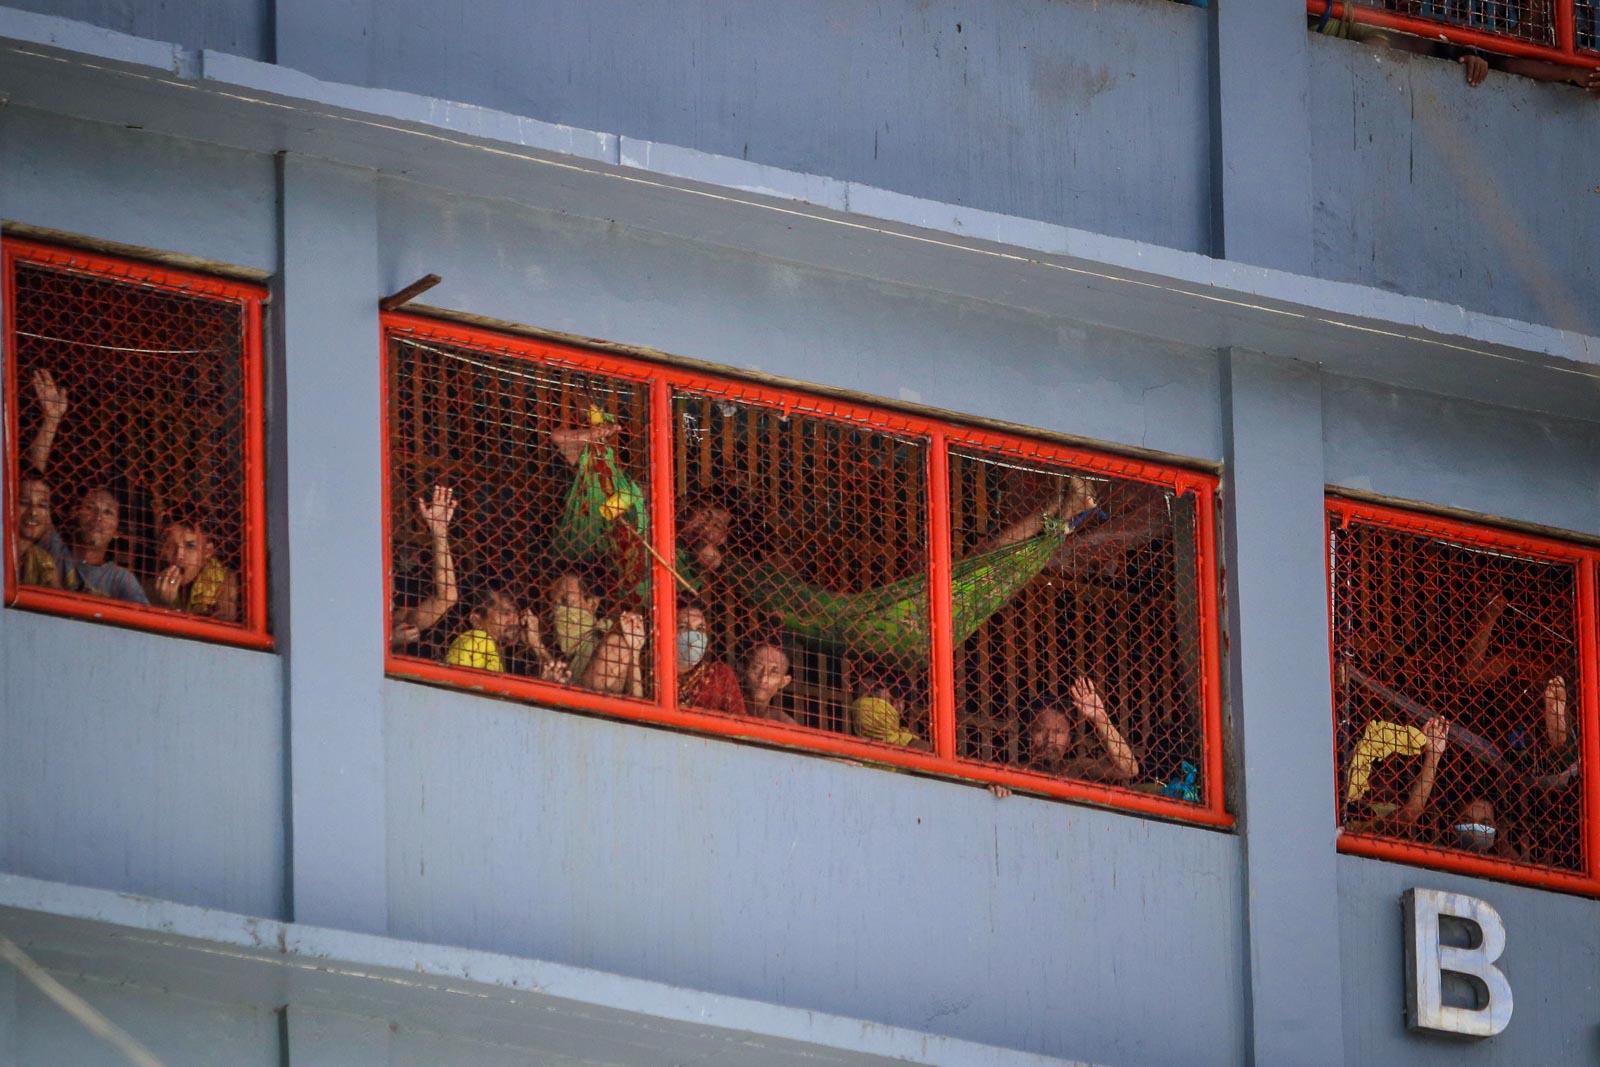 OVERCROWDED. At least 210 test postive for the coronavirus at the overcrowded prison. Photo by Gelo Litonjua/Rappler 